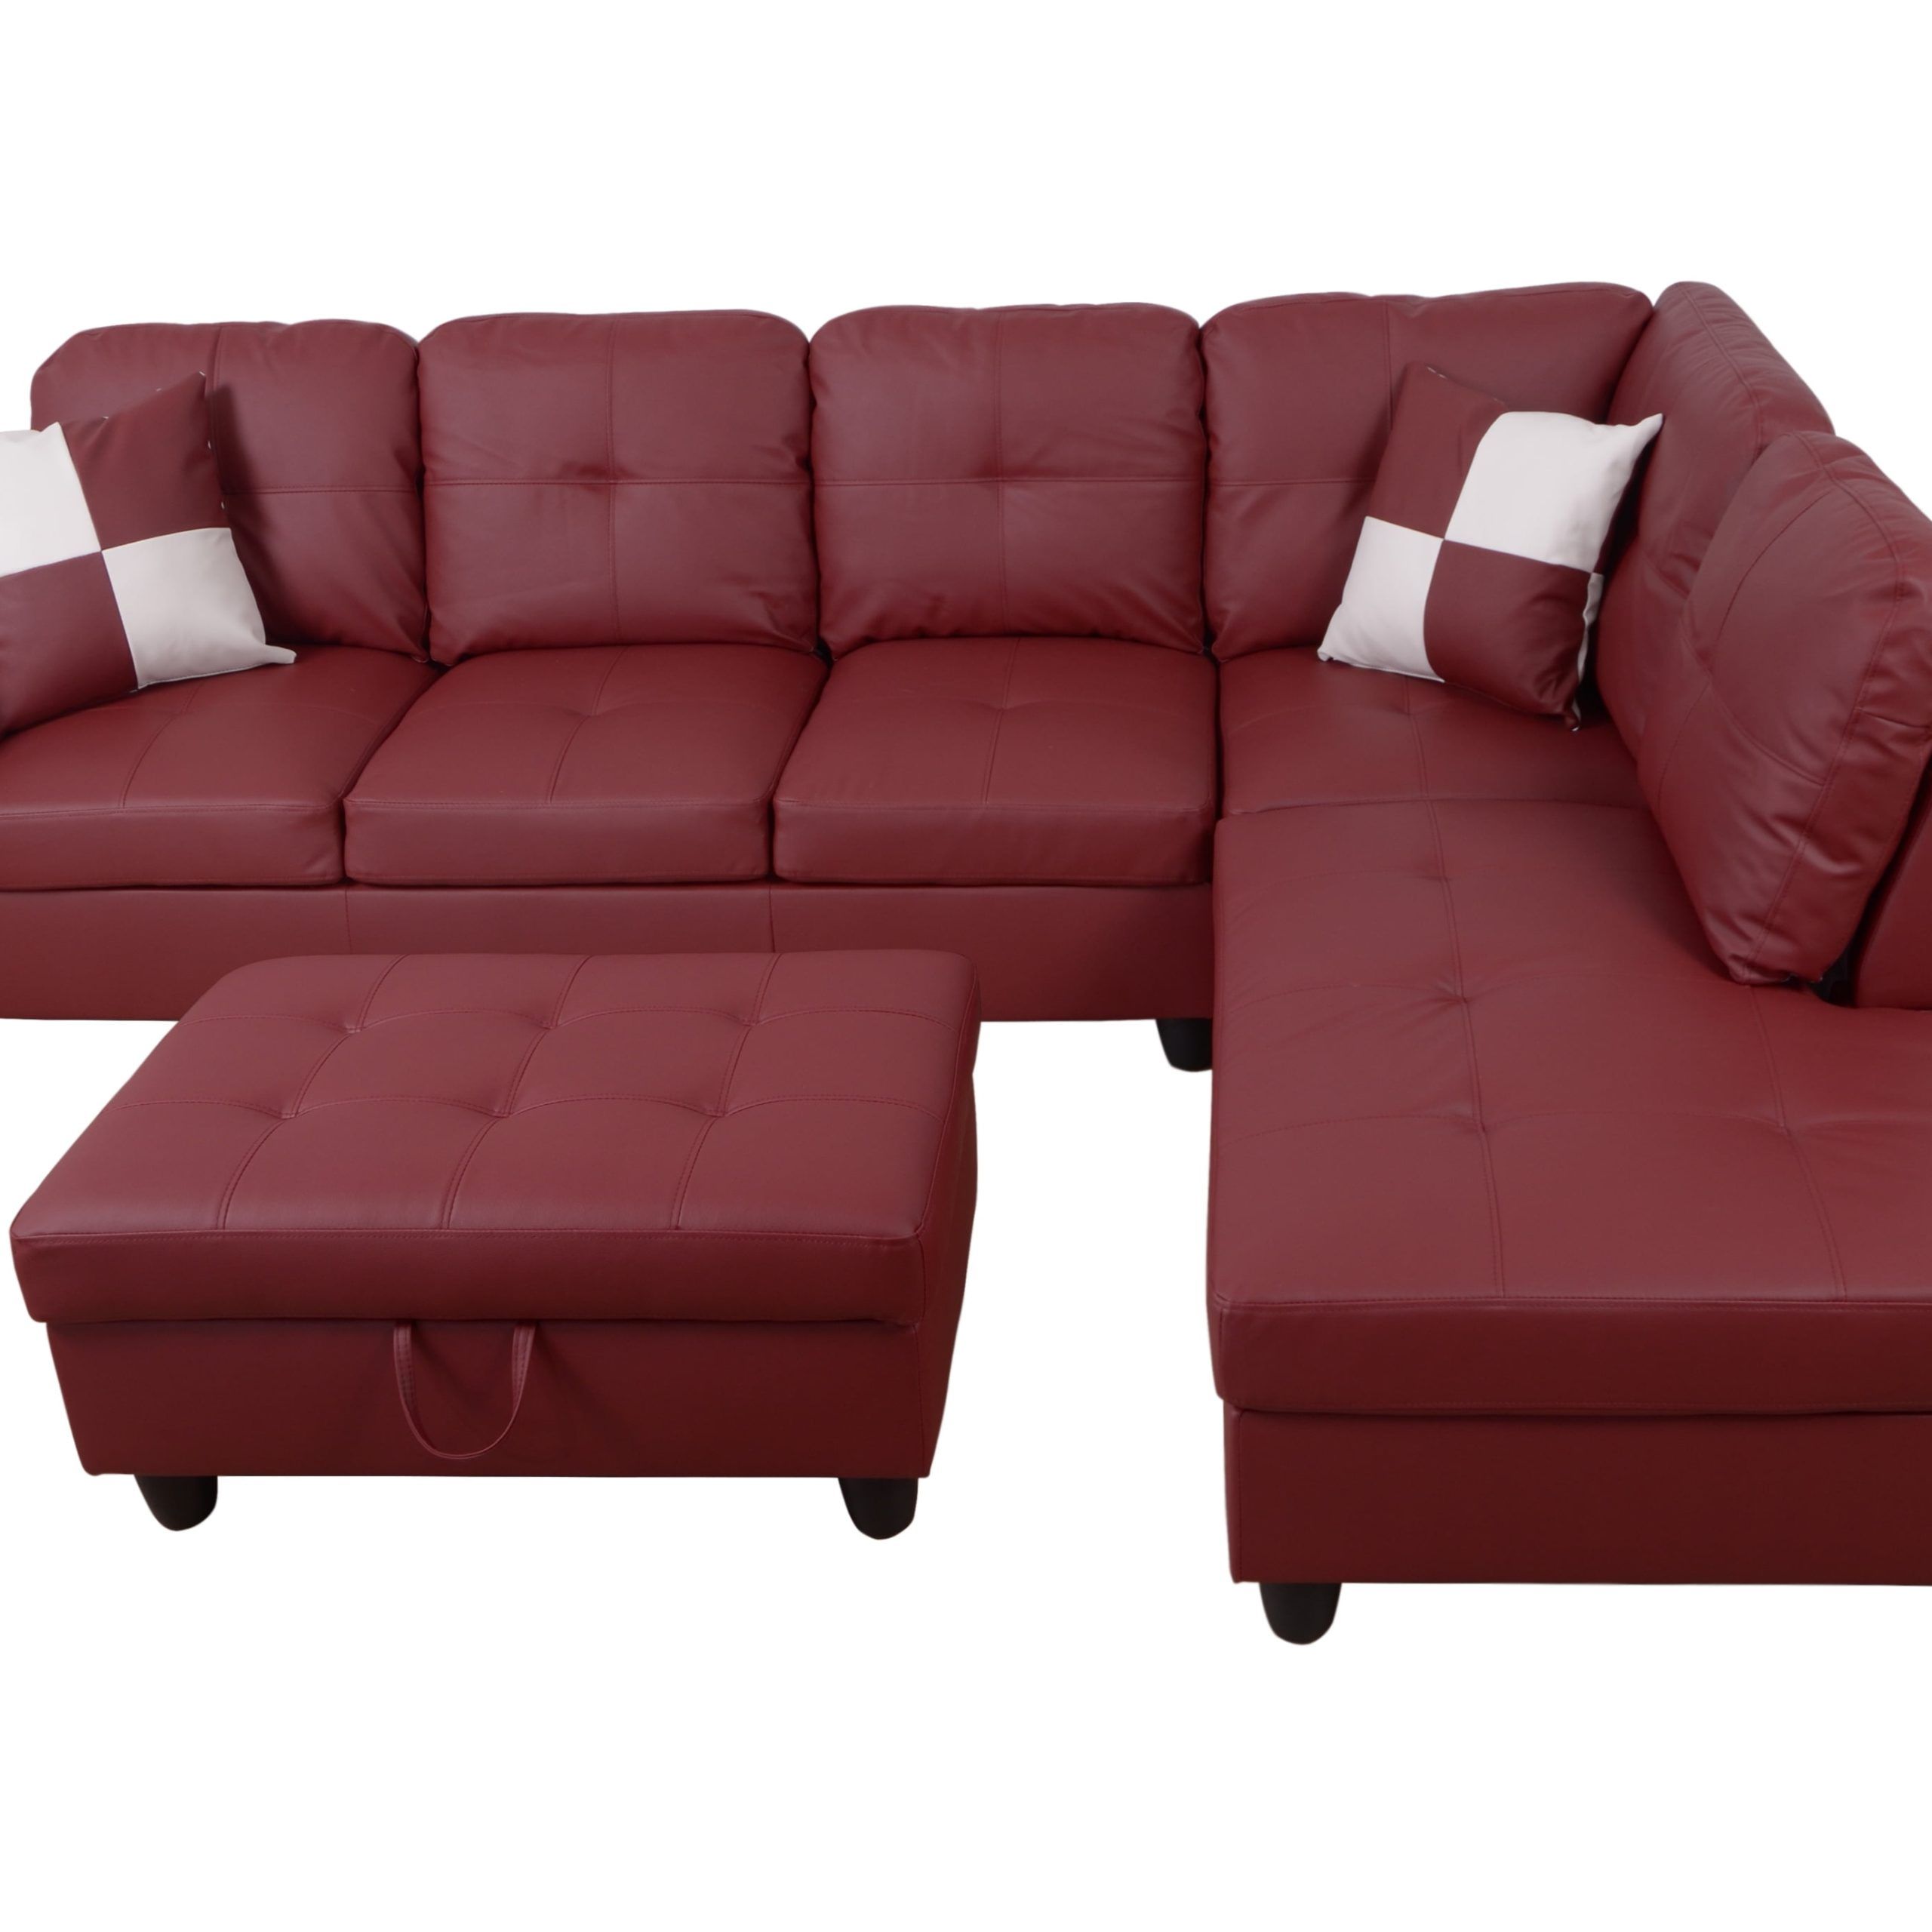 For U Furnishing Classic Red Faux Leather Sectional Sofa, Right Facing Throughout Faux Leather Sectional Sofa Sets (Gallery 13 of 21)